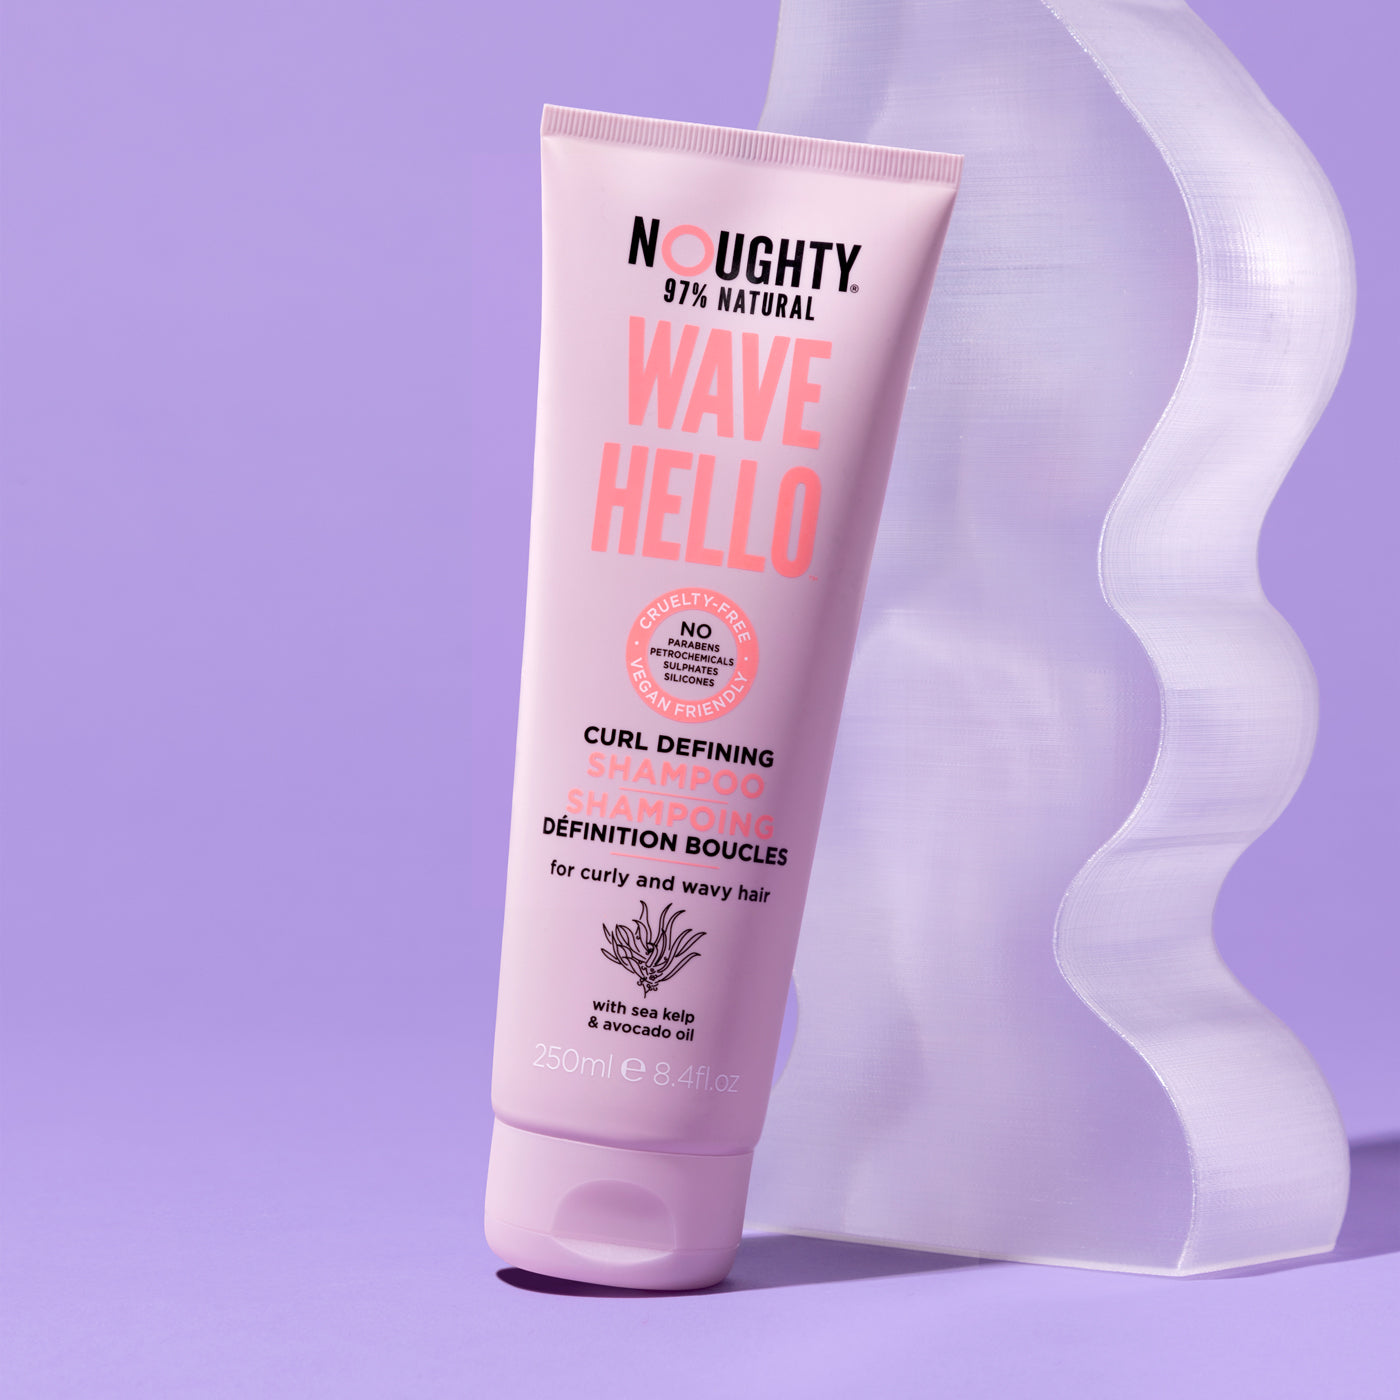 Noughty Wave Hello curl defining shampoo for curly, wavy and coily hair. Natural haircare vegan cruelty free natural sulphate free paraben free